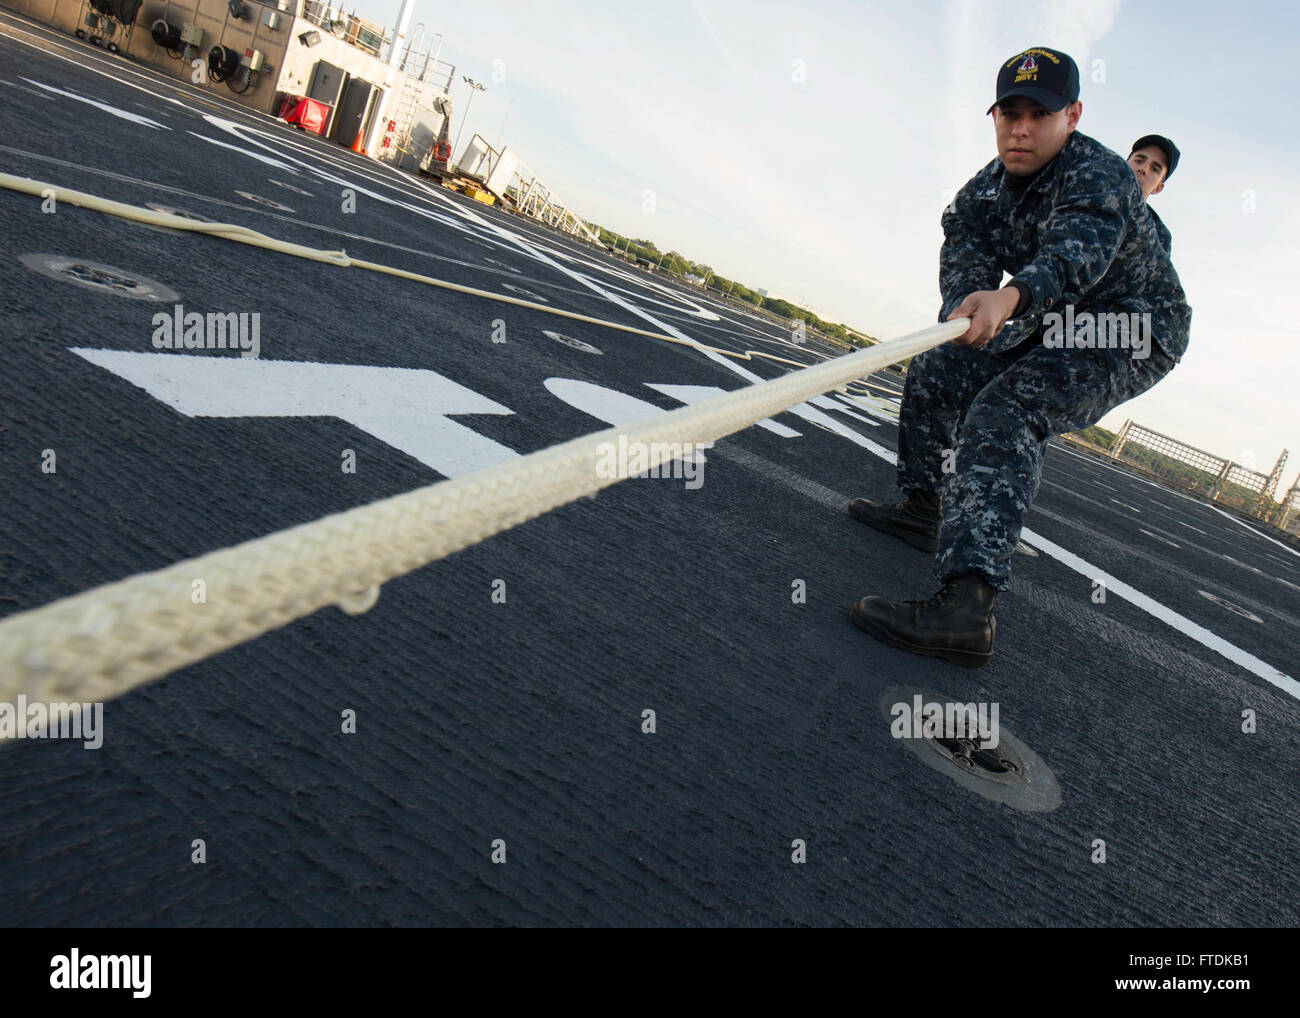 160113-N-QF605-024 ROTA, Spain (Jan. 13, 2016) Information Systems Technician (Submarines)  2nd Class Eric Favela heaves a mooring line during small boat operations aboard USNS Spearhead (T-EPF 1) Jan. 13, 2016. The Military Sealift Command expeditionary fast transport vessel USNS Spearhead is on a scheduled deployment to the U.S. 6th Fleet area of operations to support the international collaborative capacity-building program Africa Partnership Station. (U.S. Navy photo by Mass Communication Specialist 1st Class Amanda Dunford/Released) Stock Photo